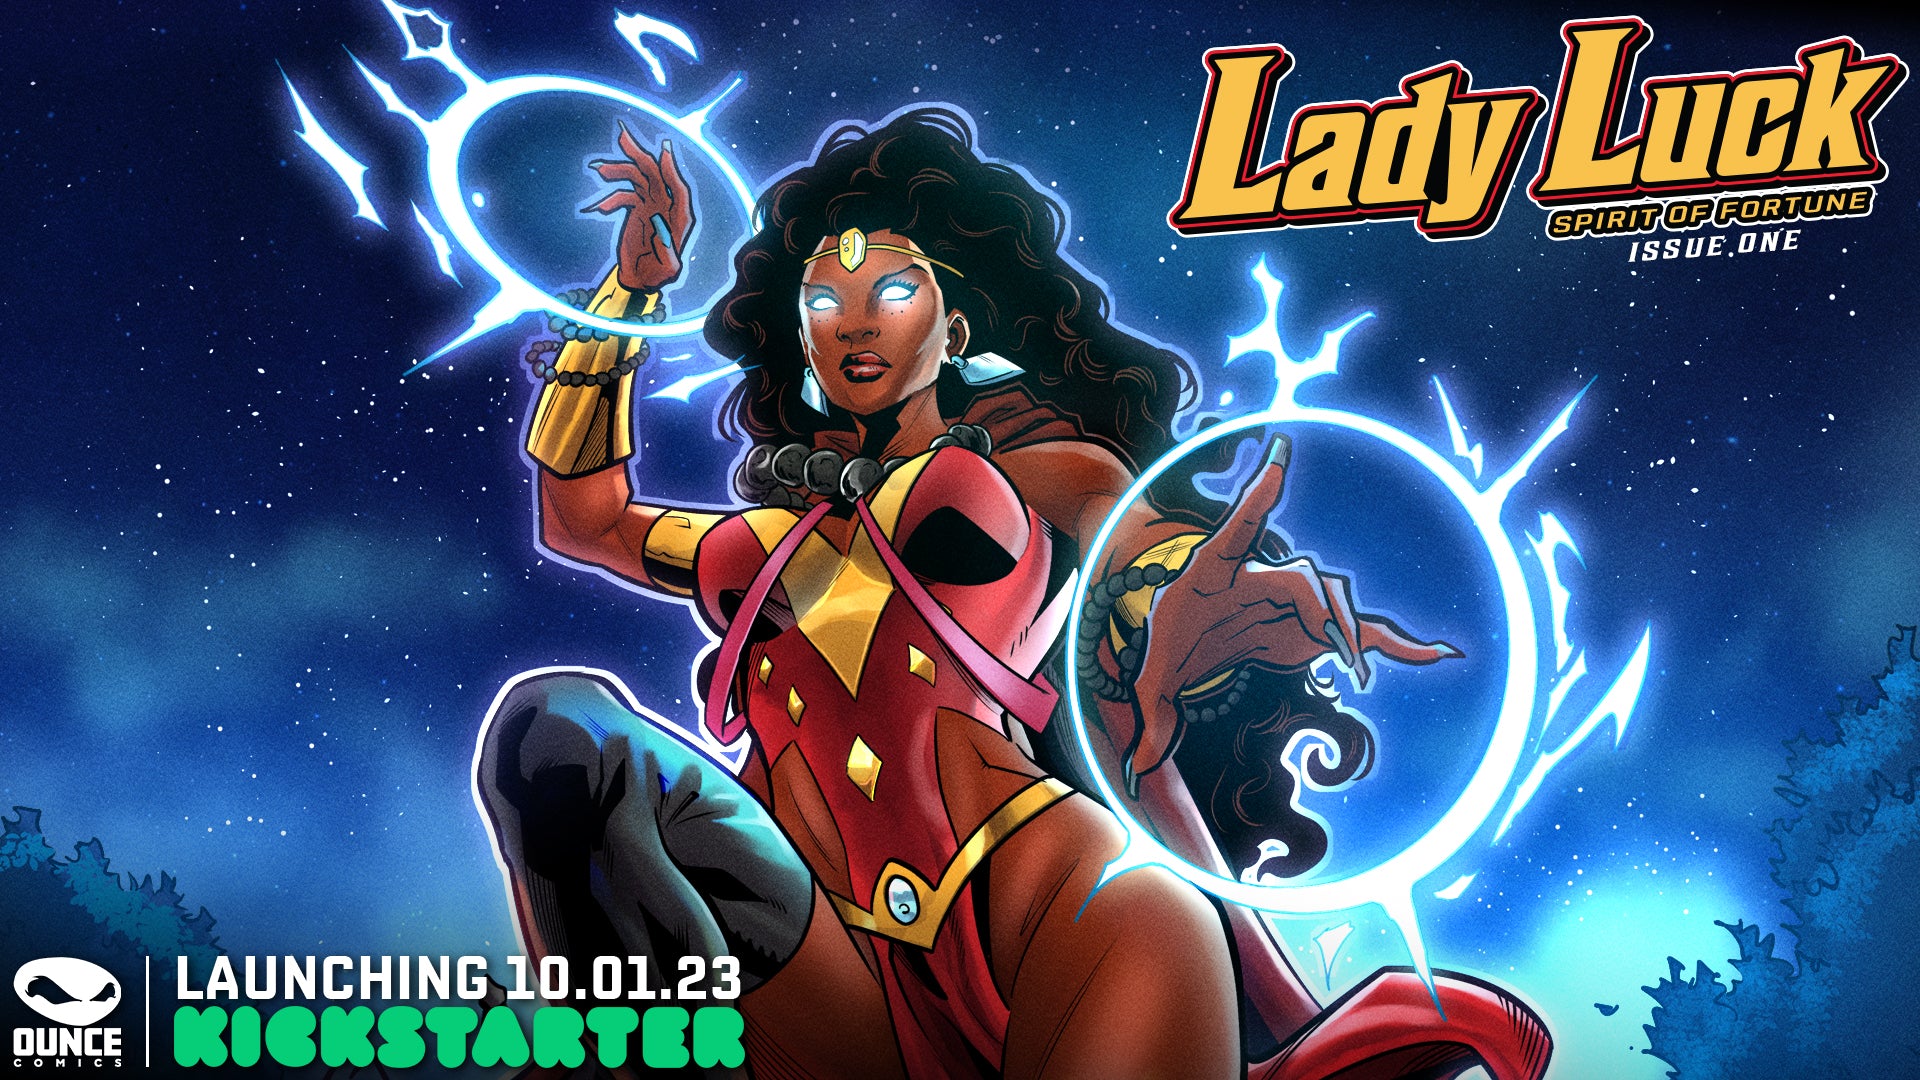 Coming to Kickstarter - Lady Luck: Spirit of Fortune #1